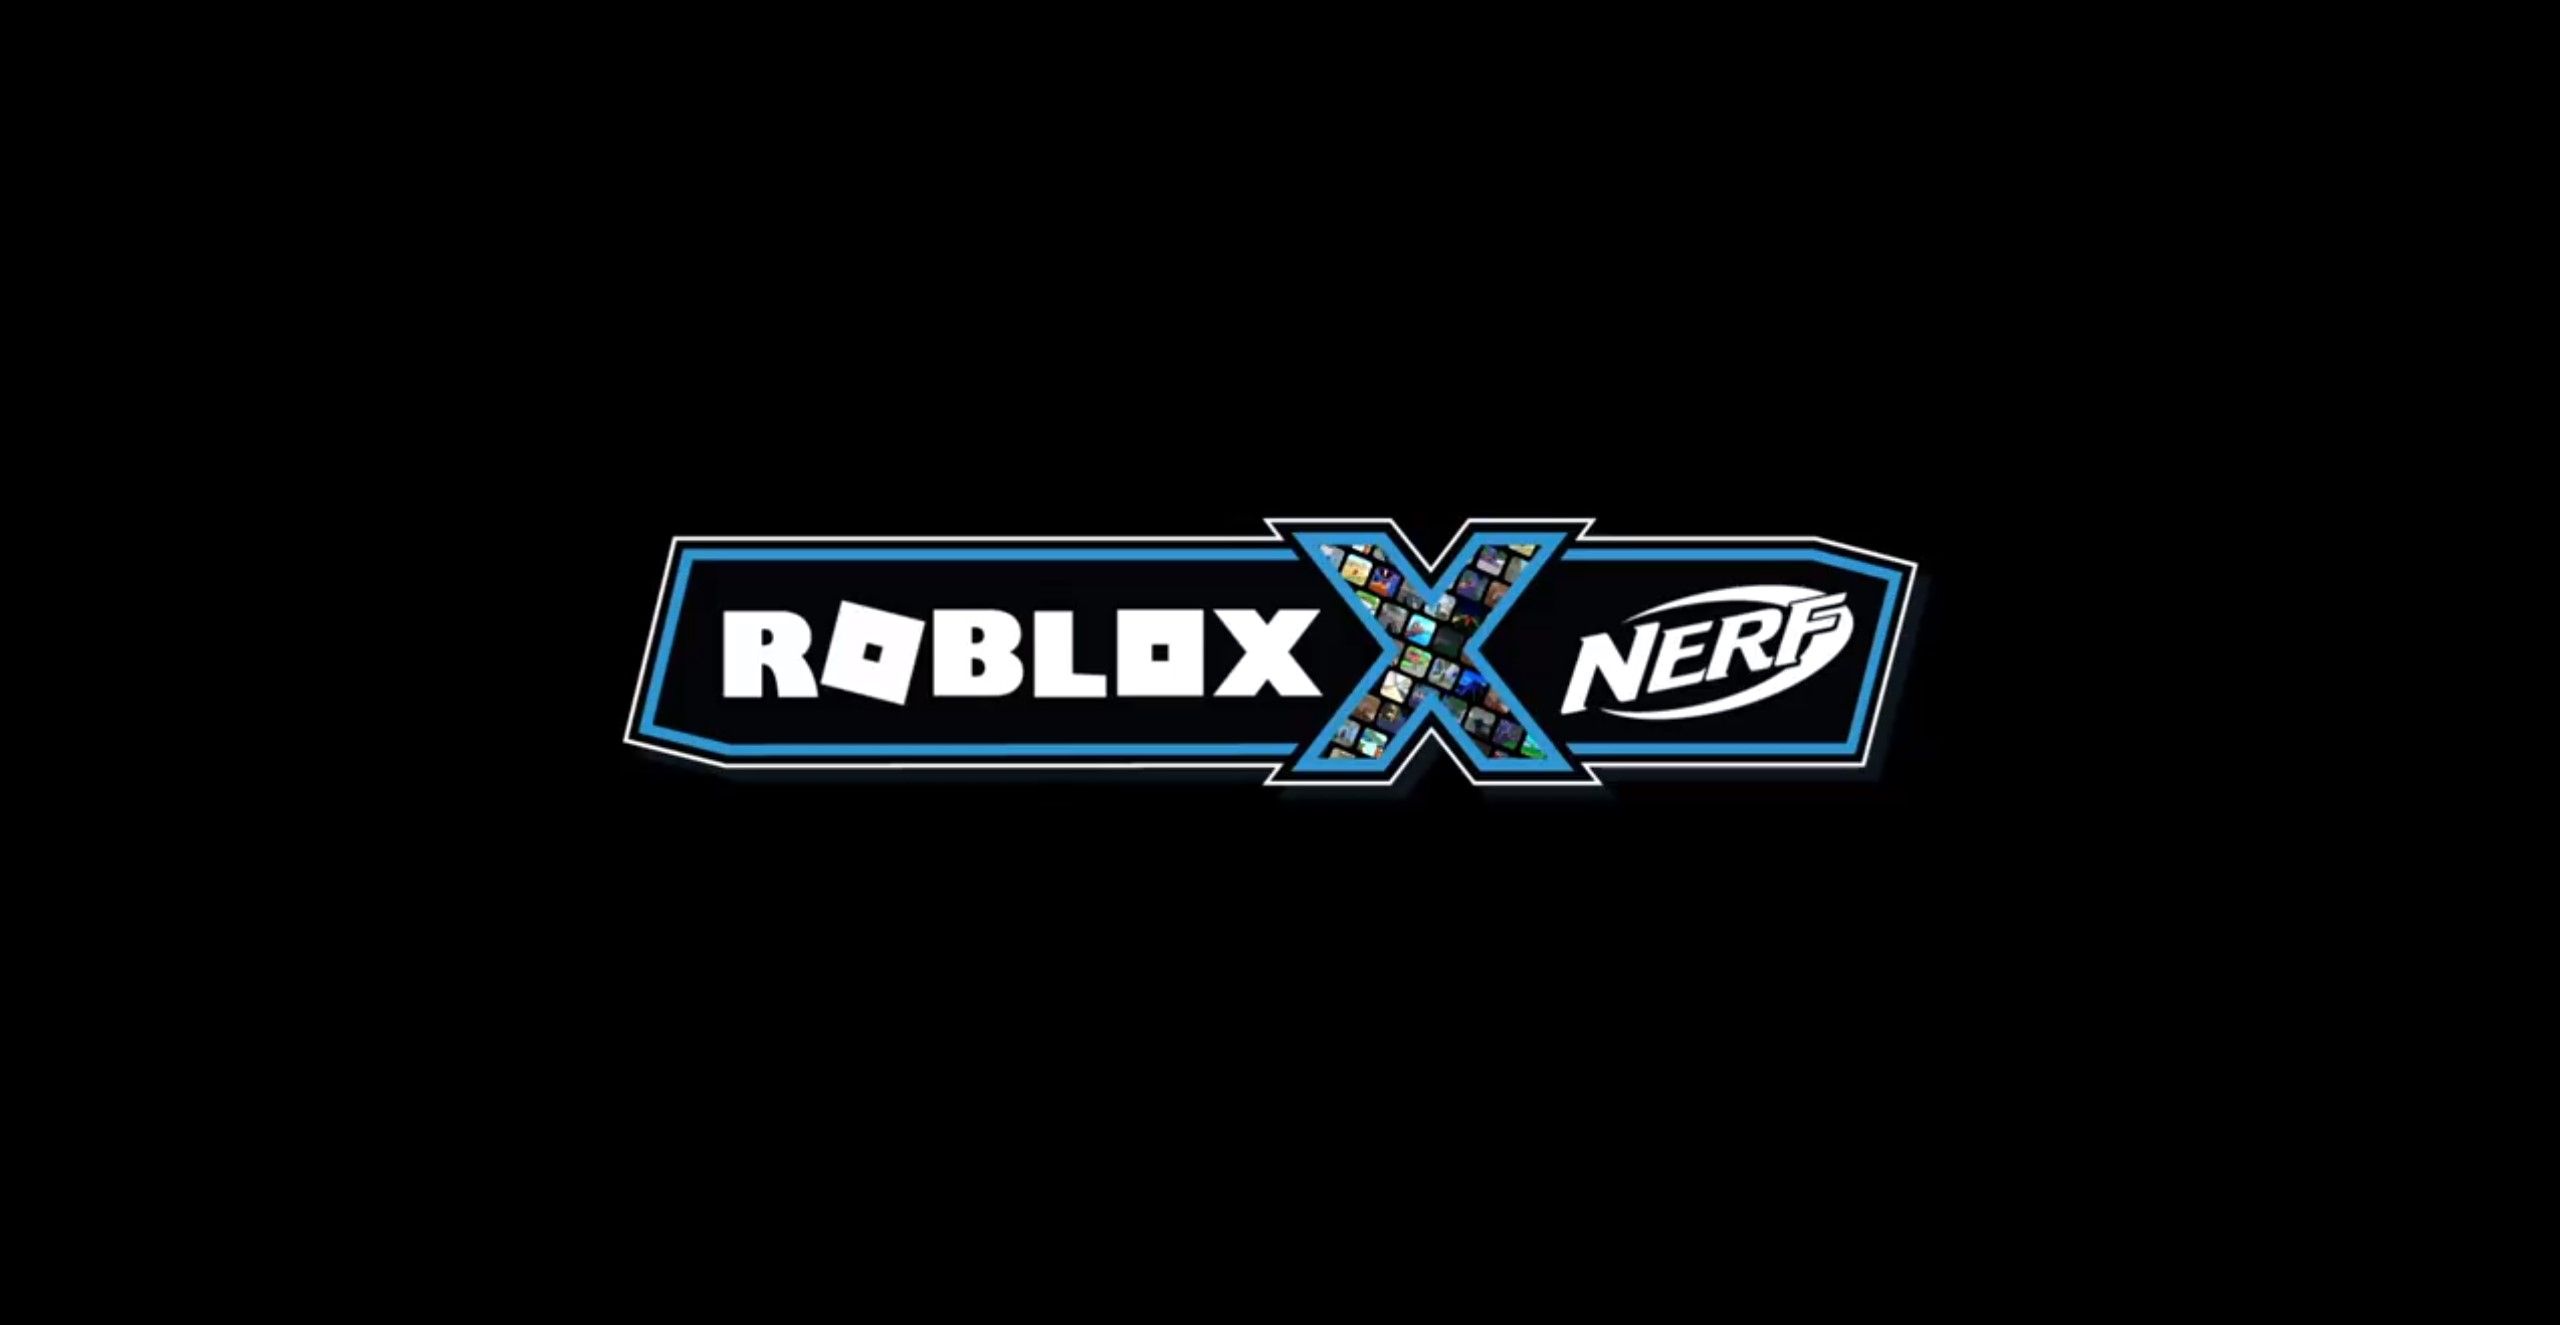 Hasbro, Roblox Team Up for NERF, Monopoly x Roblox Crossover - The Toy Book